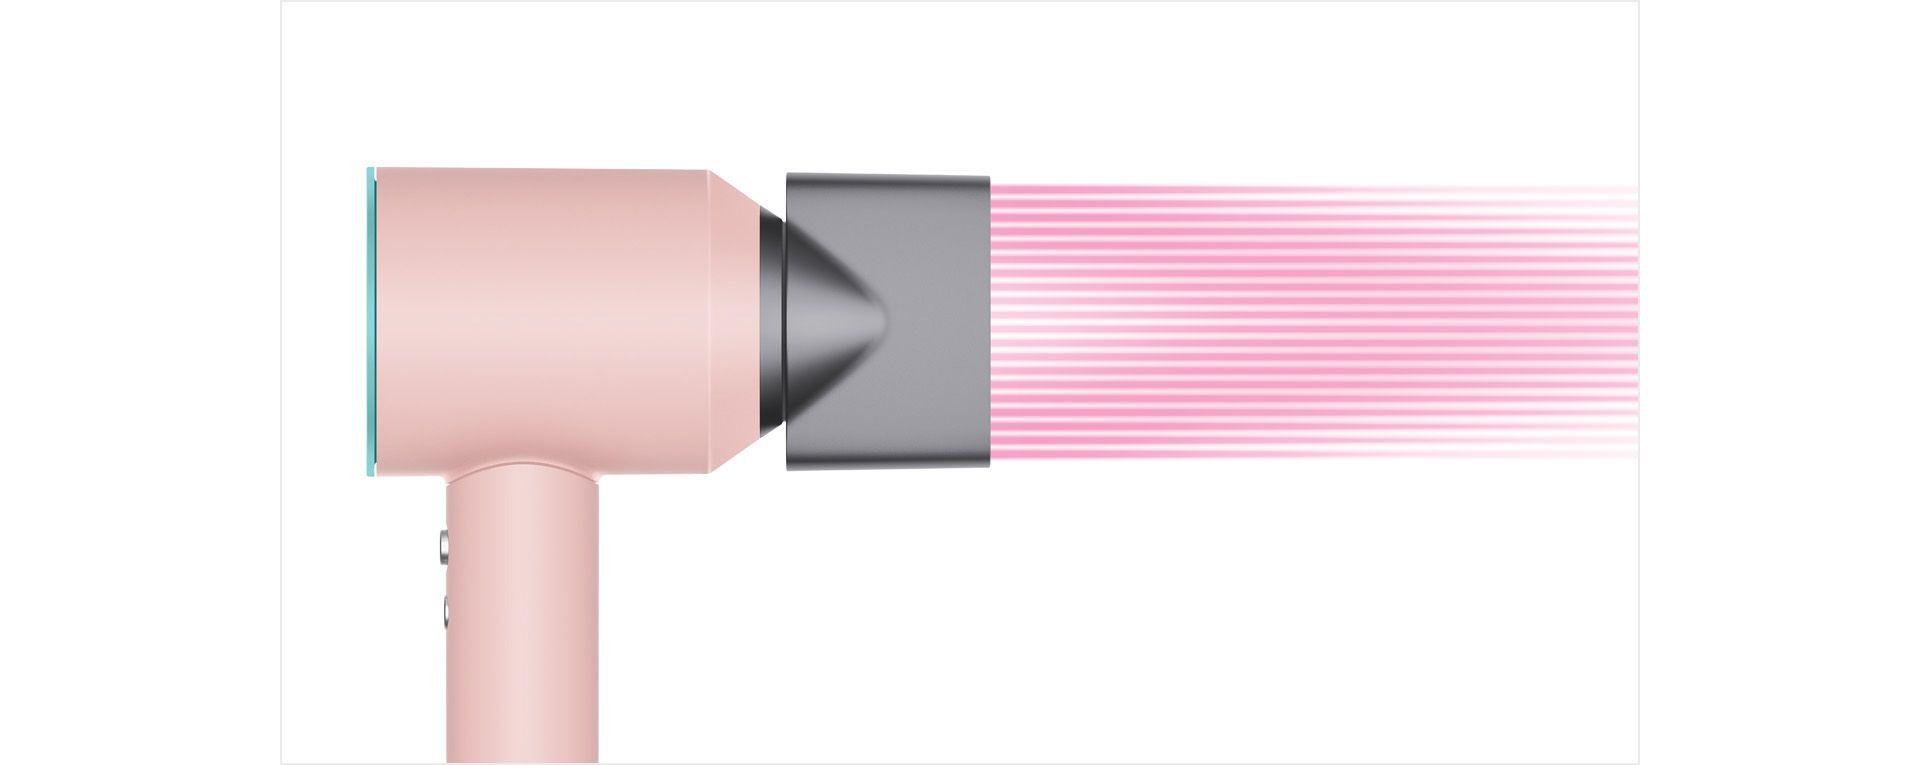 Profile view of Dyson Supersonic with Styling concentrator attachment